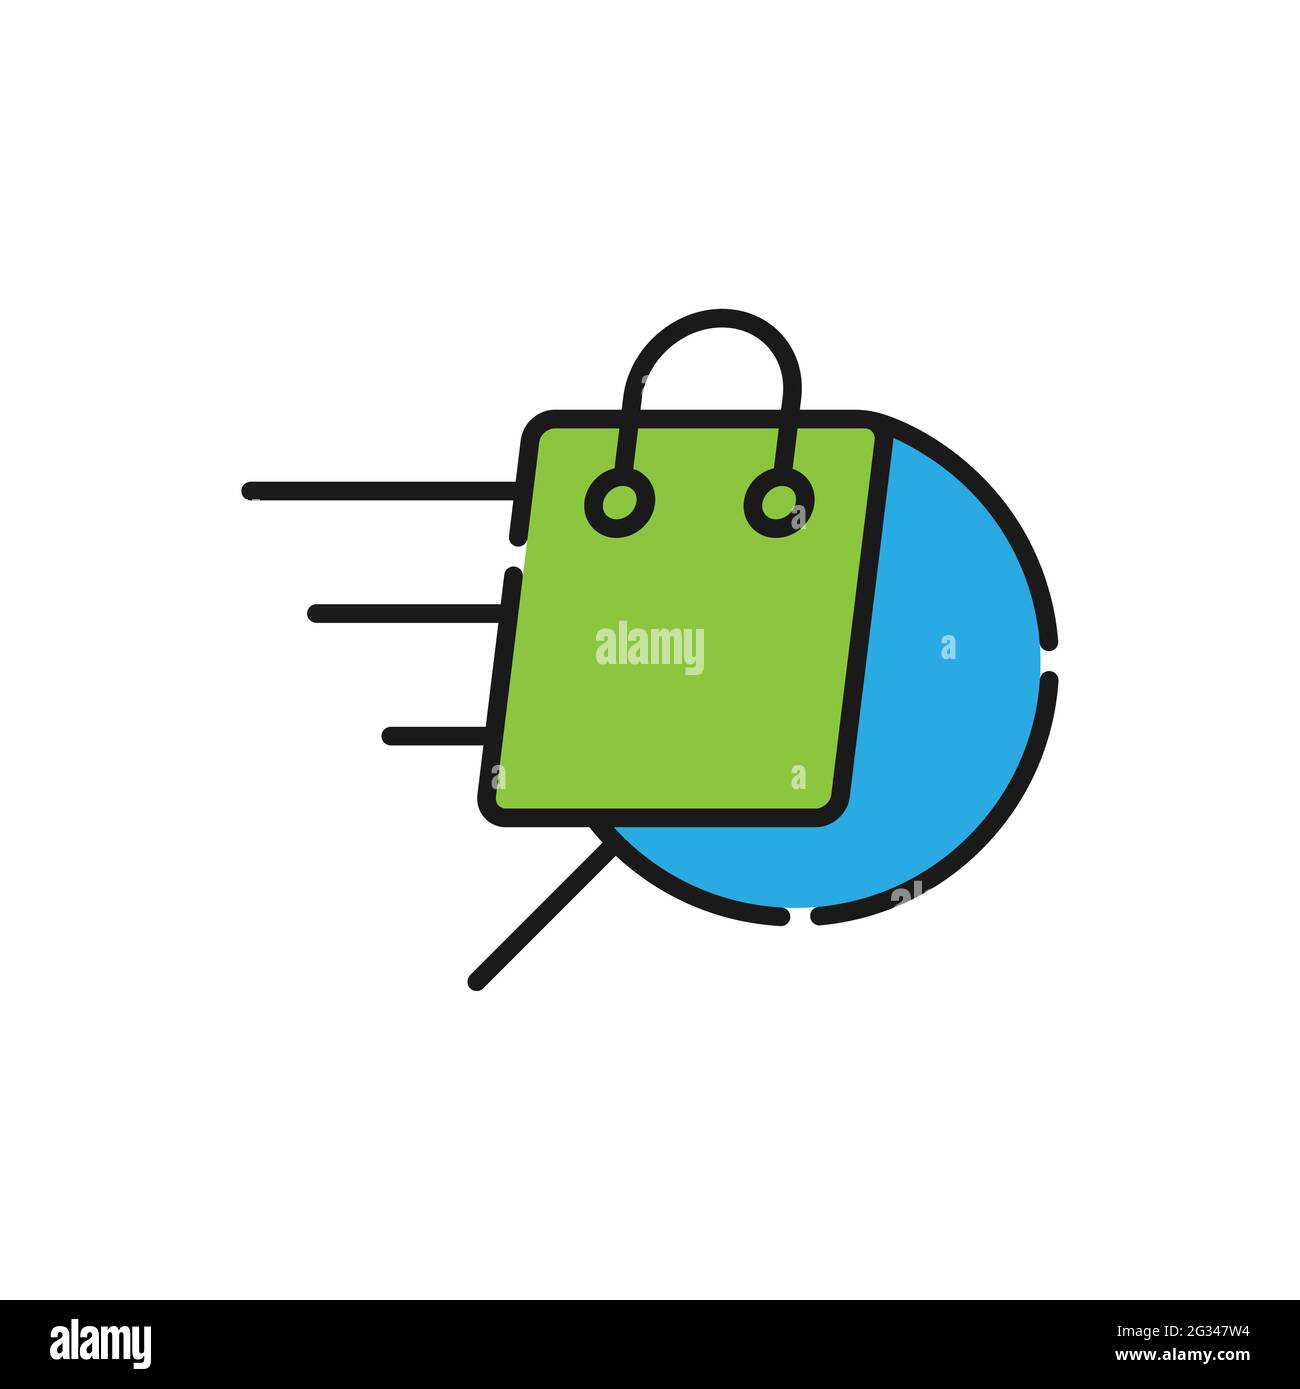 Shopping Bag with Search icon Vector Design. Shopping Bag icon with Searching design concept for e-commerce, online store and marketplace website, mob Stock Vector